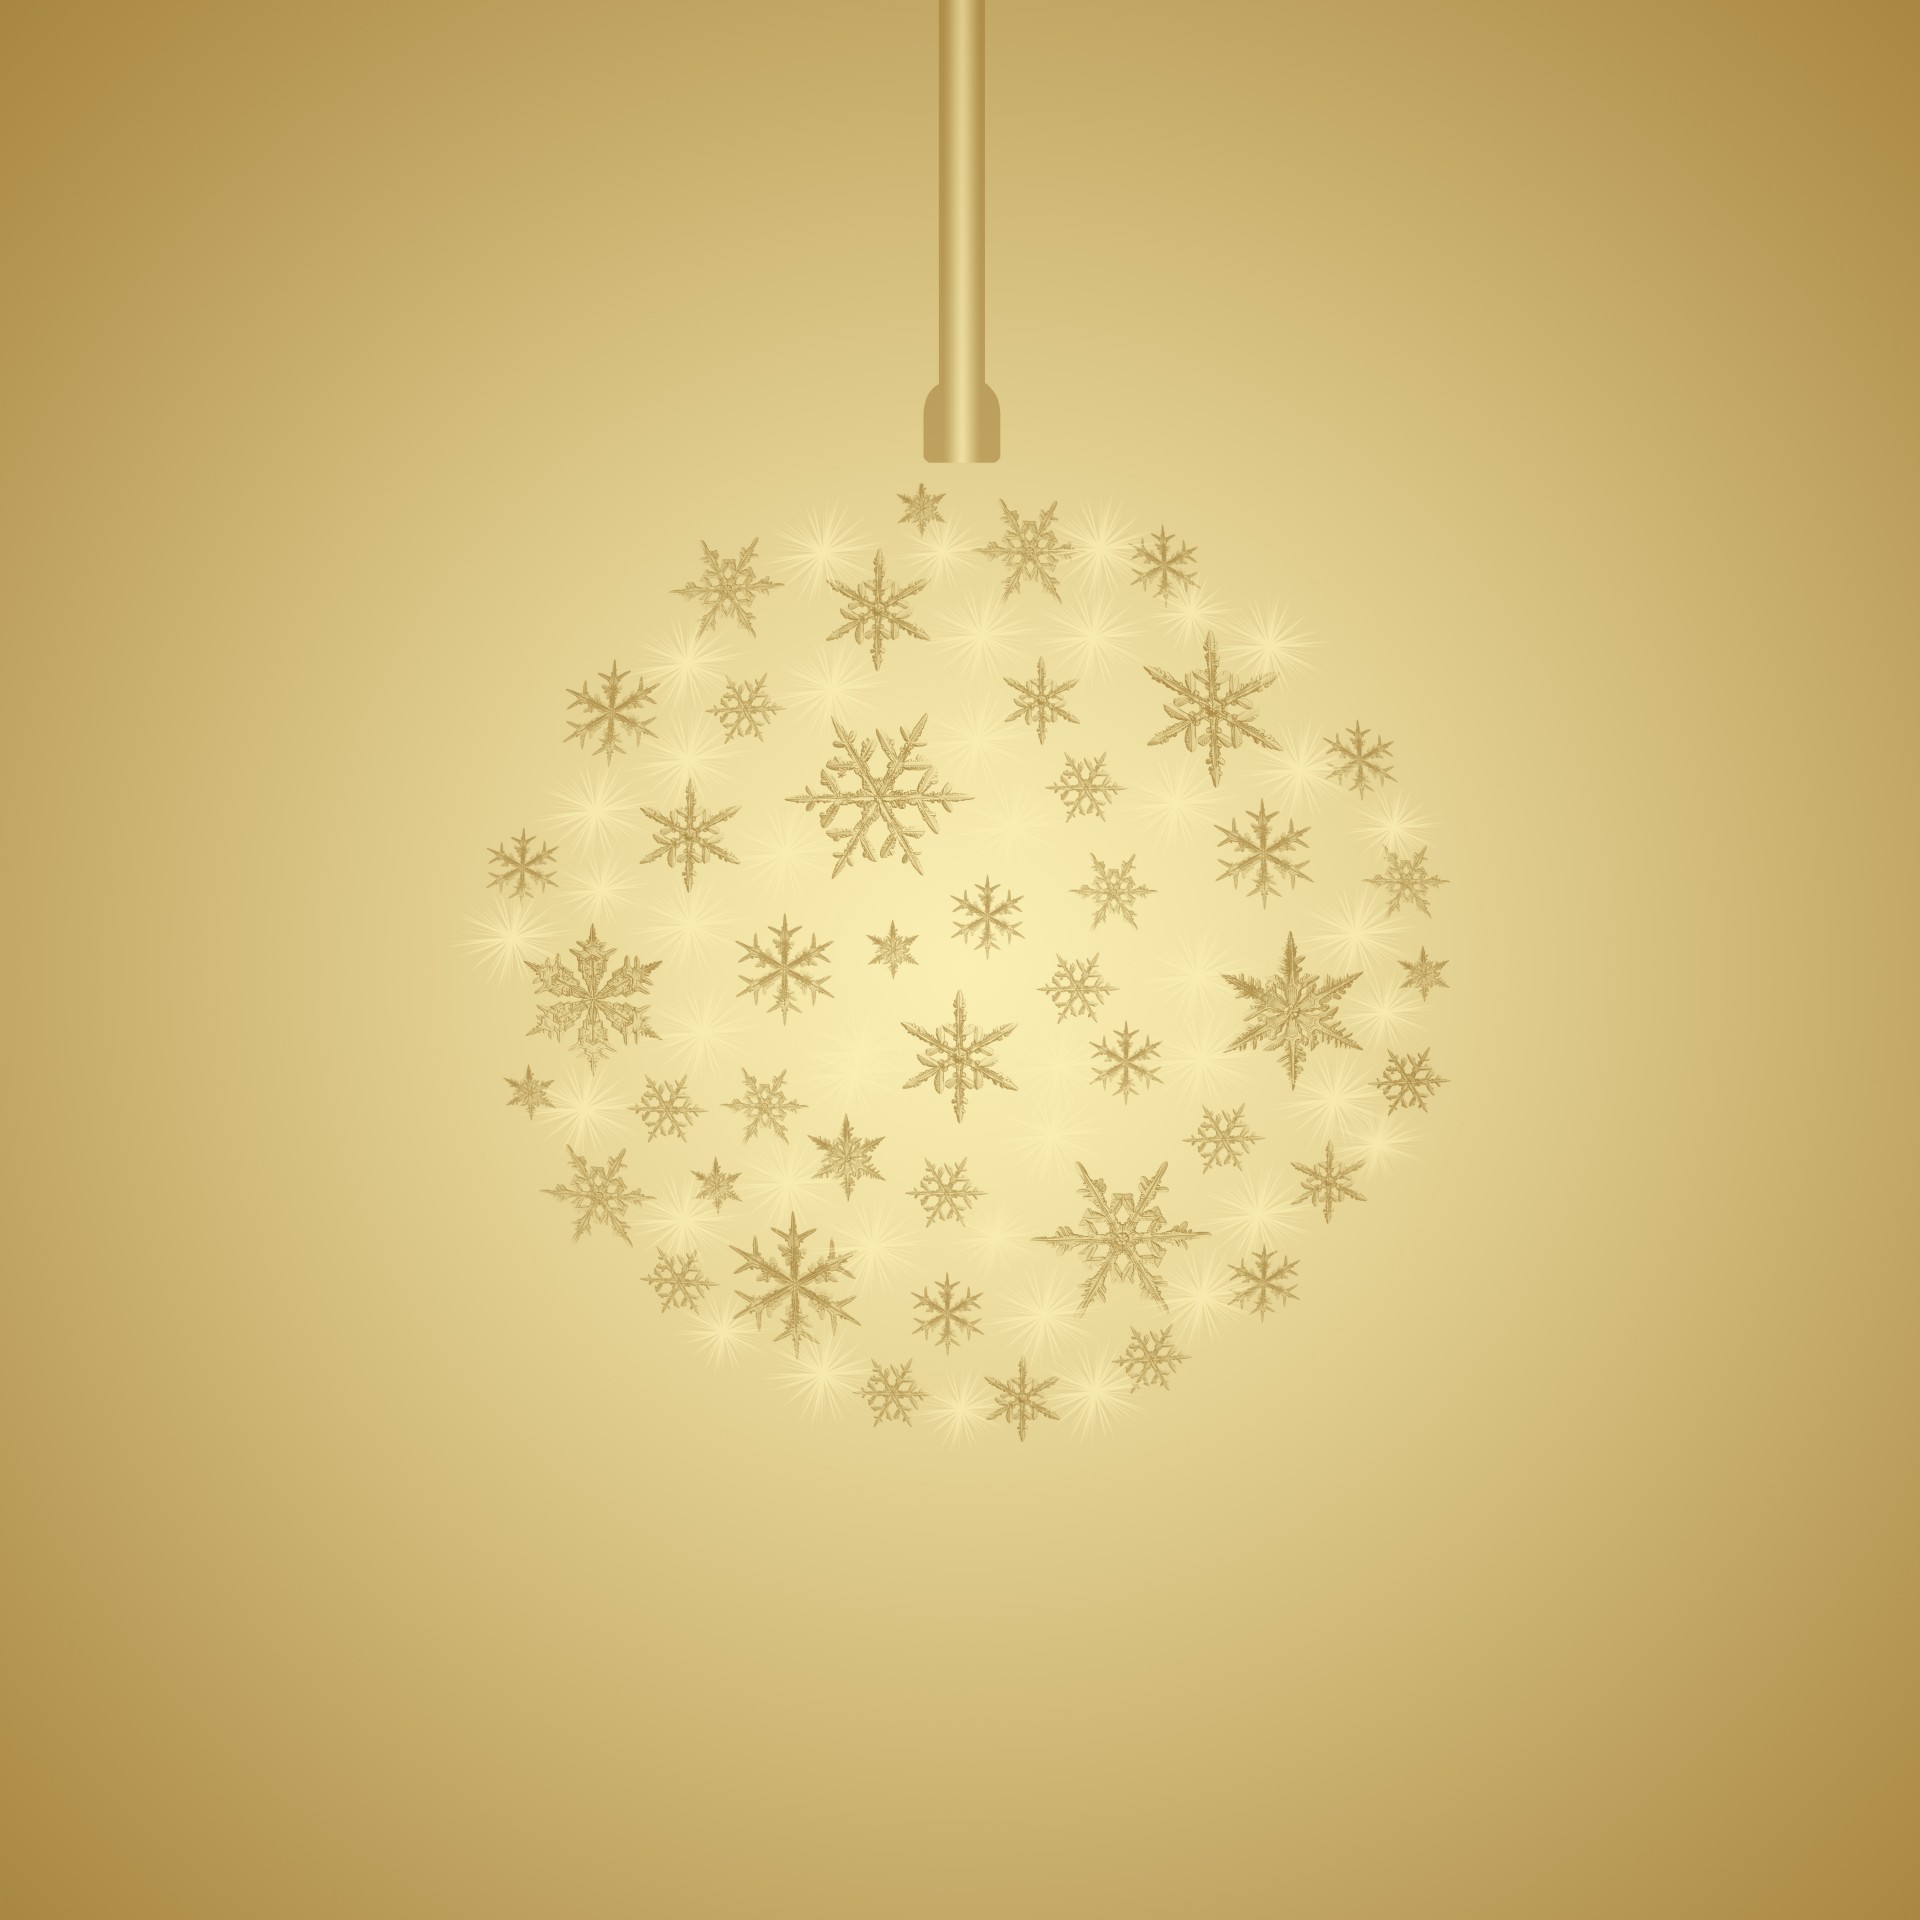 background abstract bauble free photo